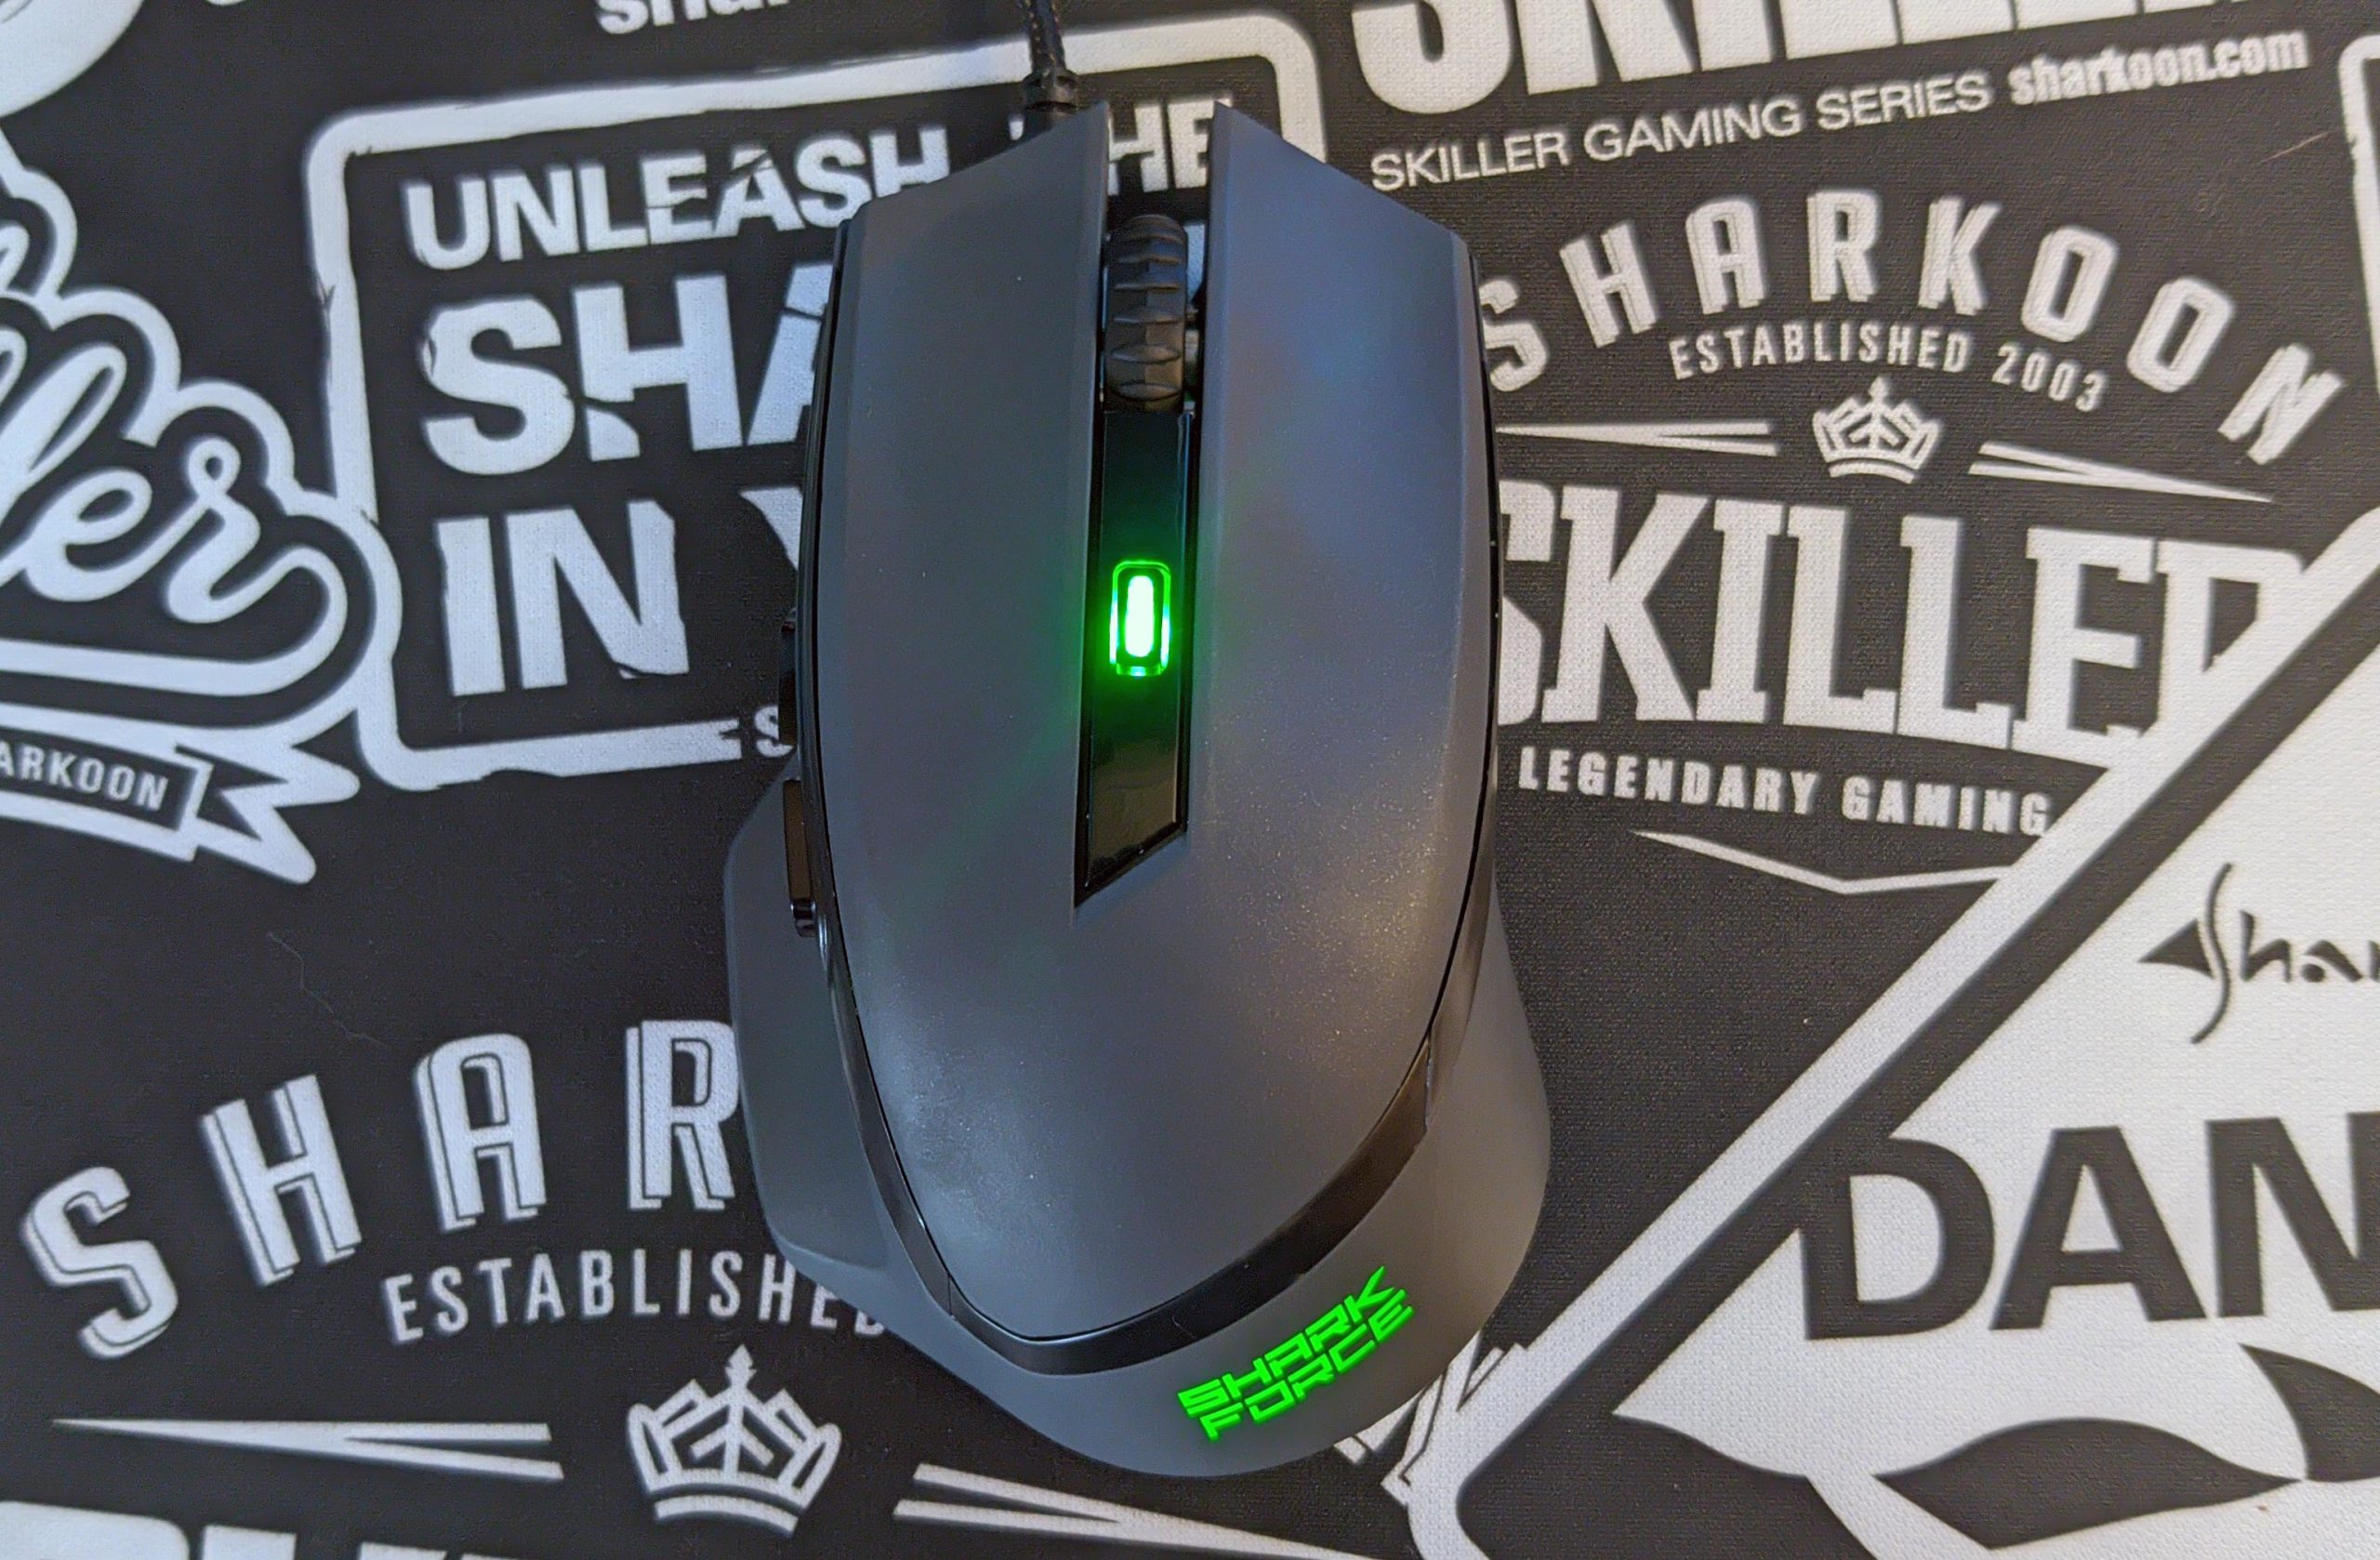 Mouse inspector Cheap | Cheap? 9-Euro-Bargain or Price Sharkoon igor´sLAB II - Force just Review Shark |